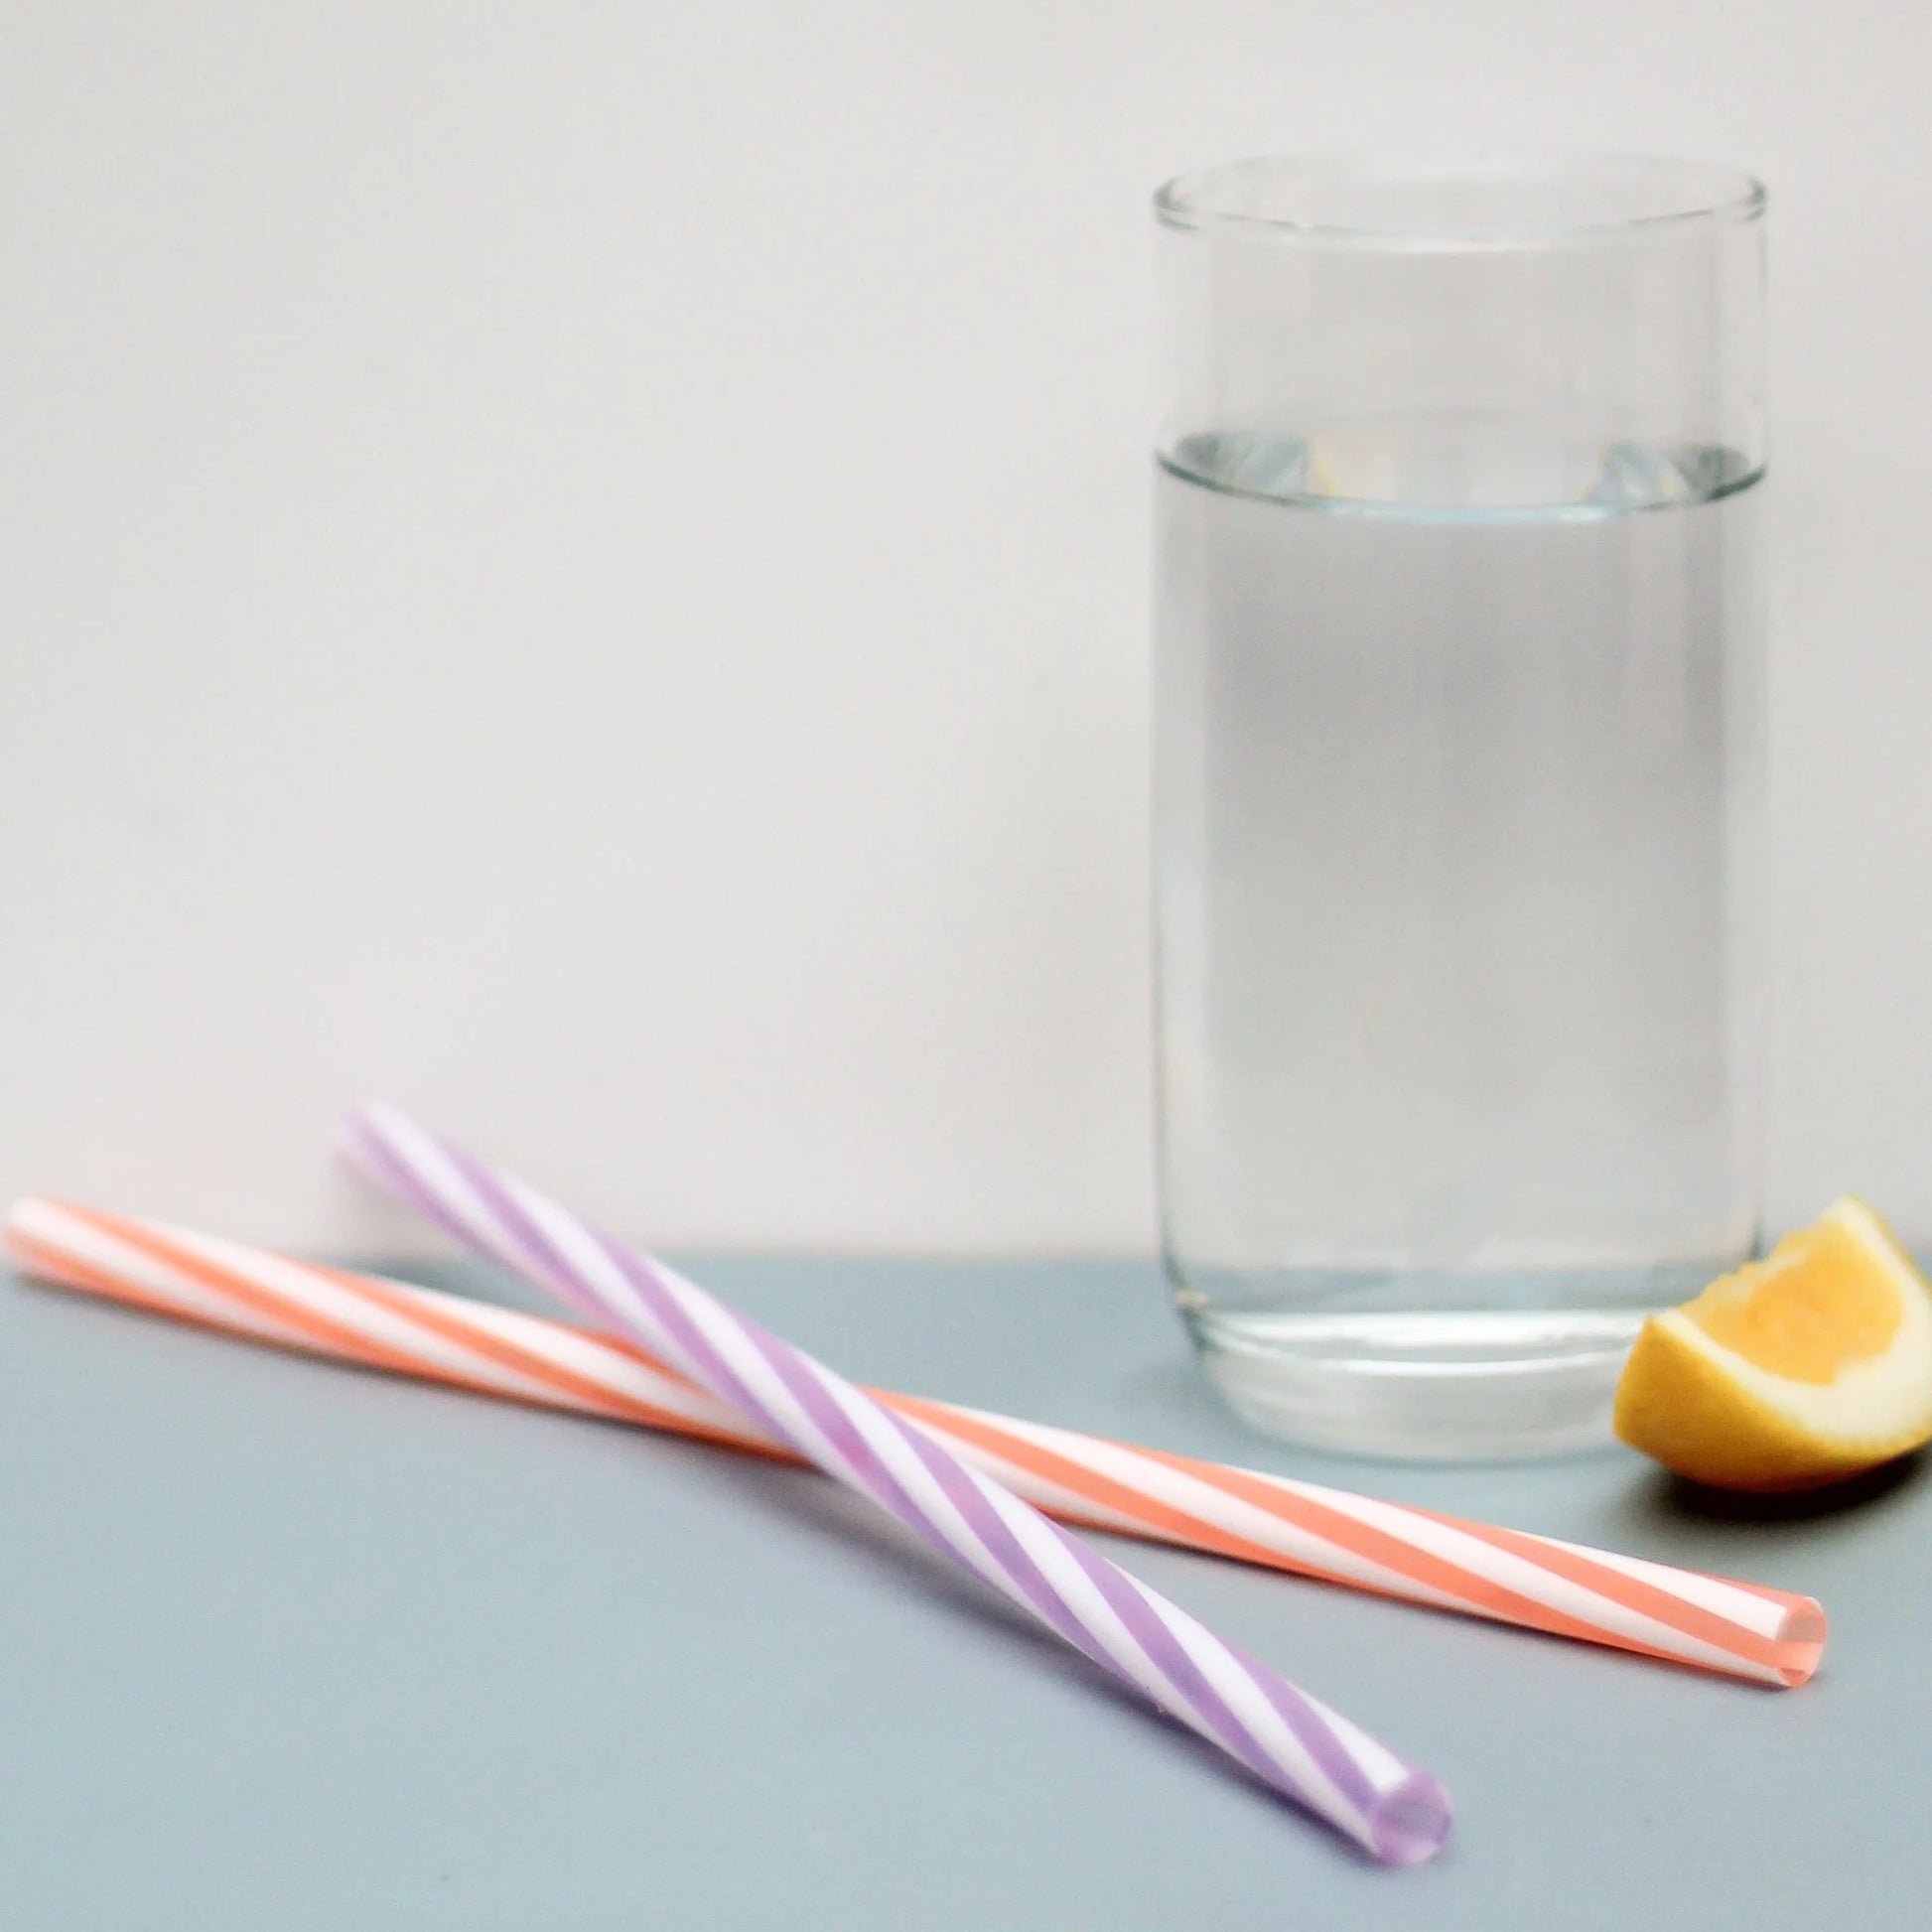 Little Giant Kids Store Stripey Silicone Straws available at Bear & Moo